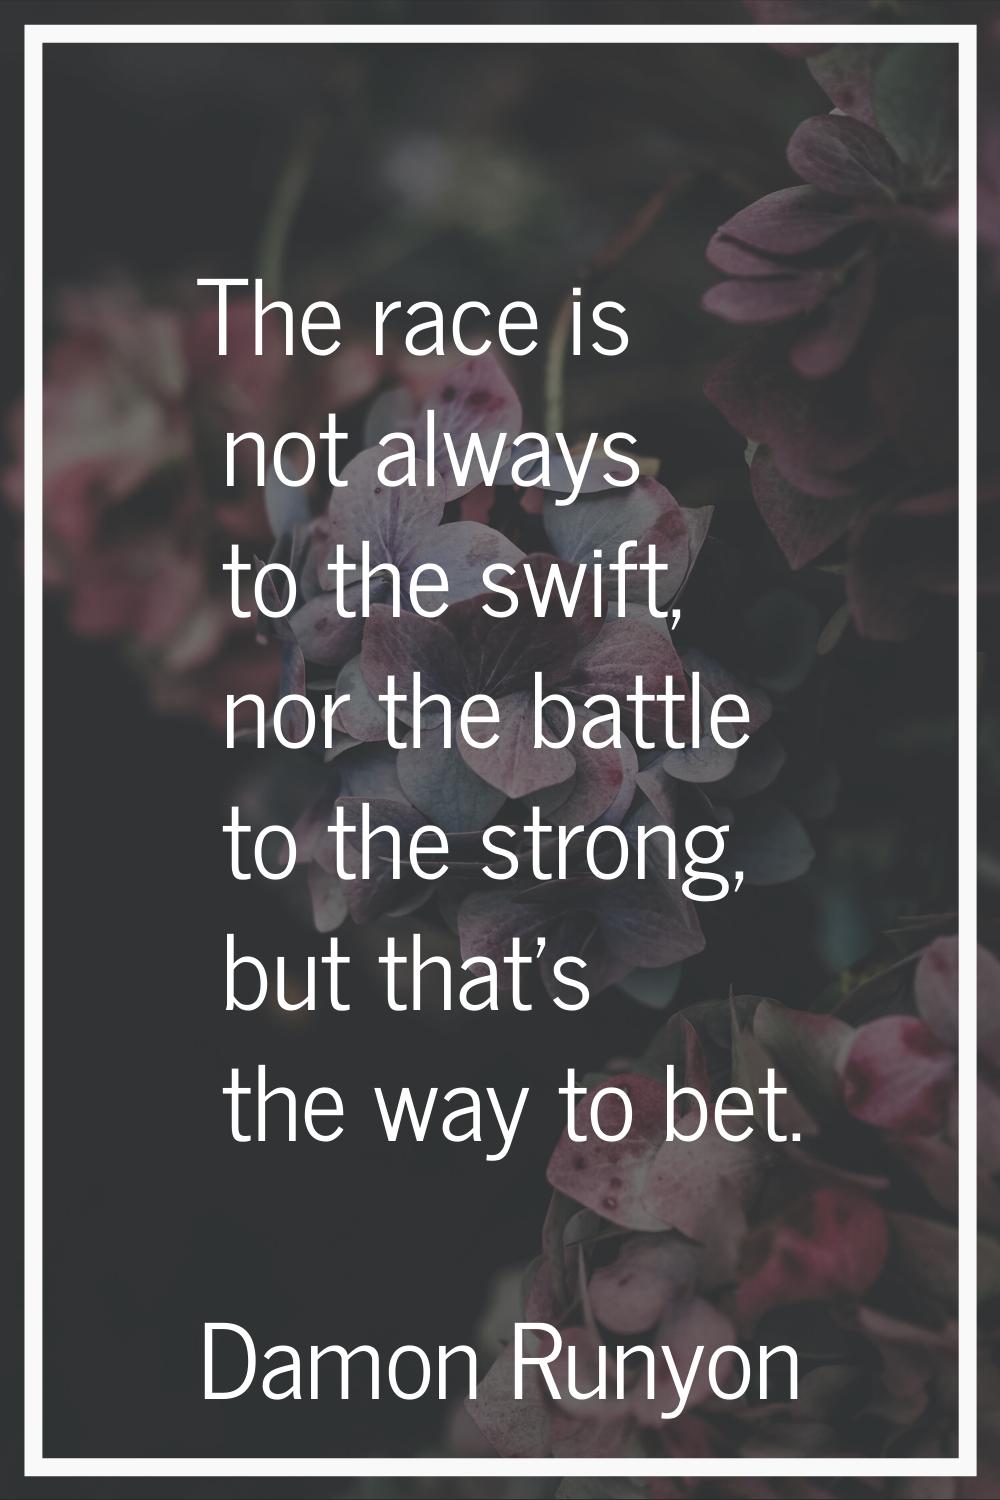 The race is not always to the swift, nor the battle to the strong, but that's the way to bet.